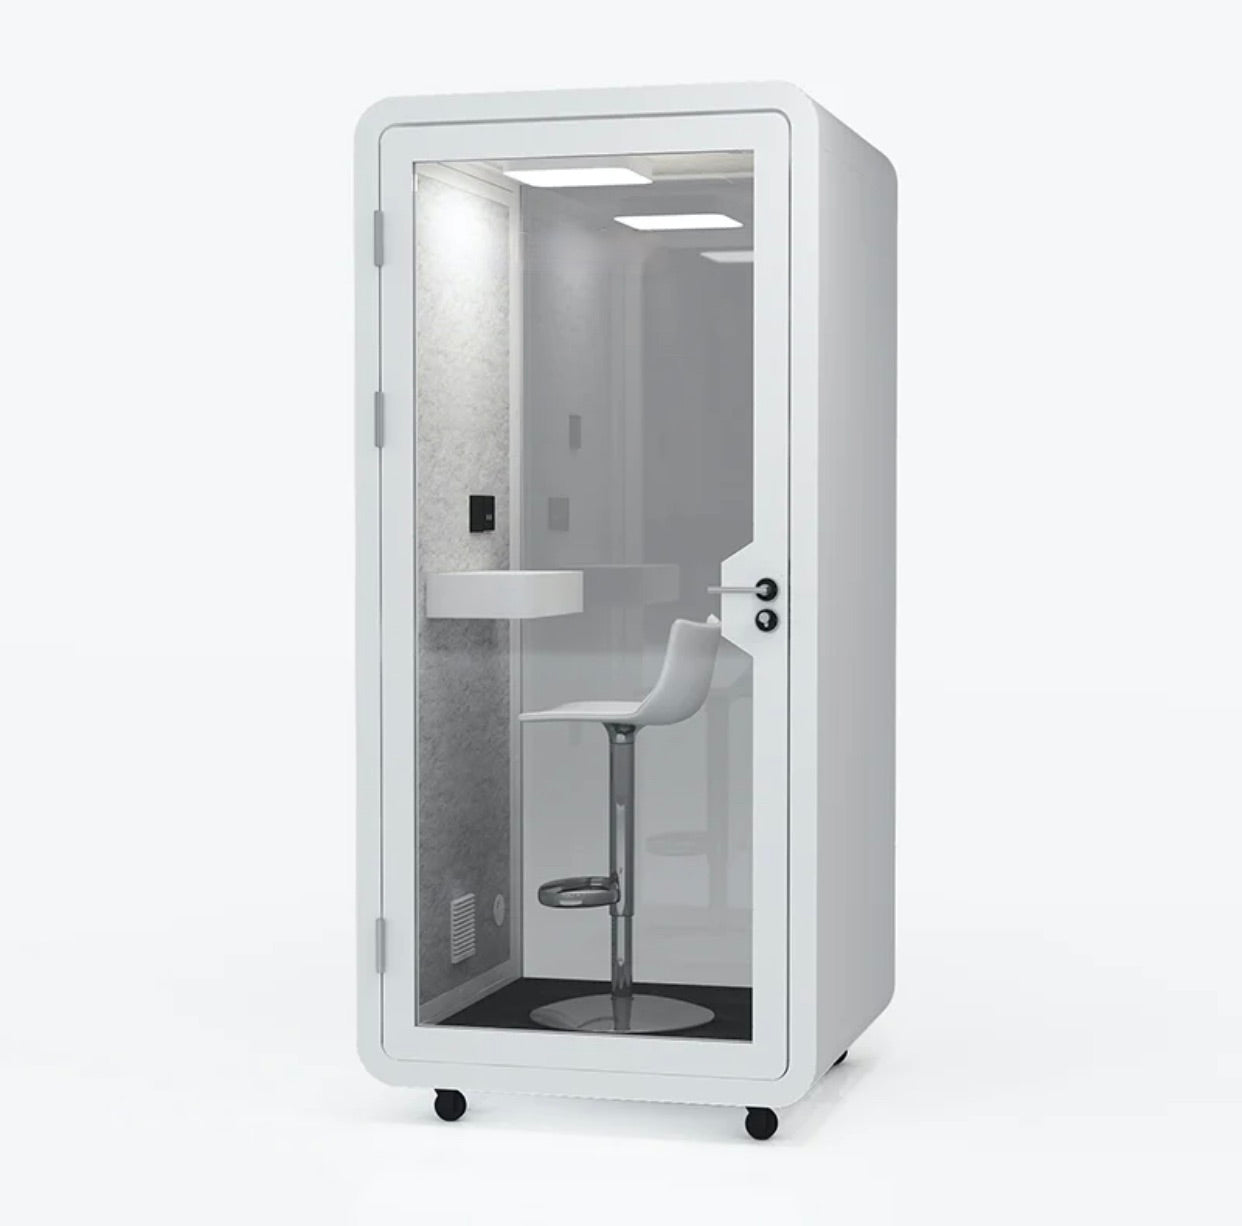 Soundproof office phone booth, solo model by eBooth